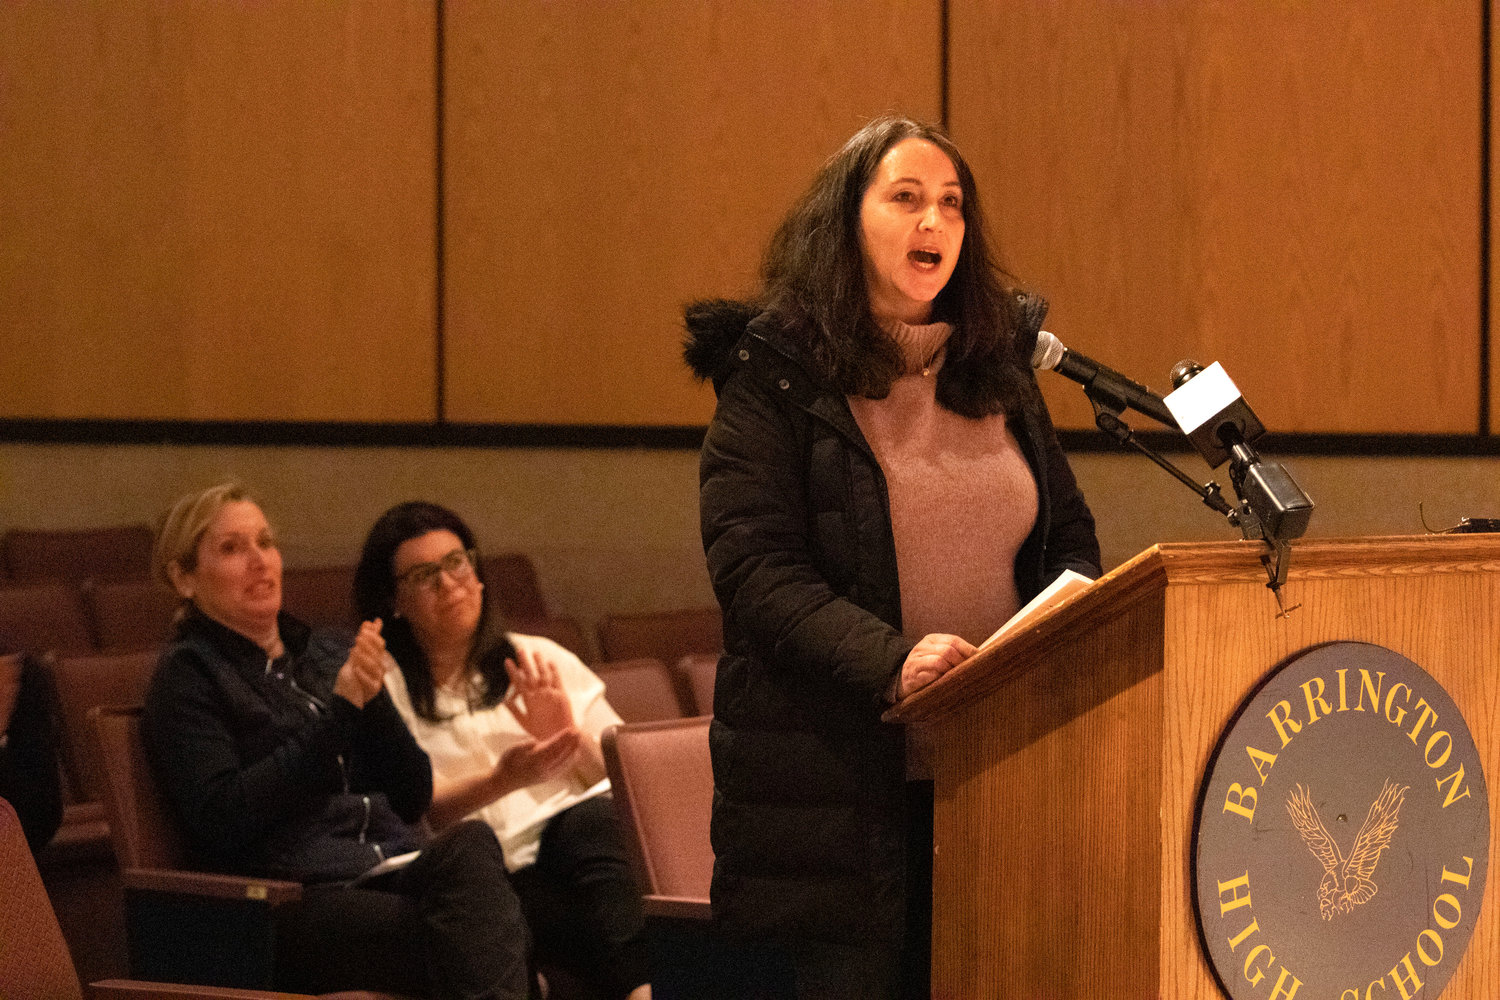 Barrington resident Parisa Beers said Paula Dillon, the district’s director of curriculum, had made false statements to the media regarding de-leveling and the honors program at Barrington High School.